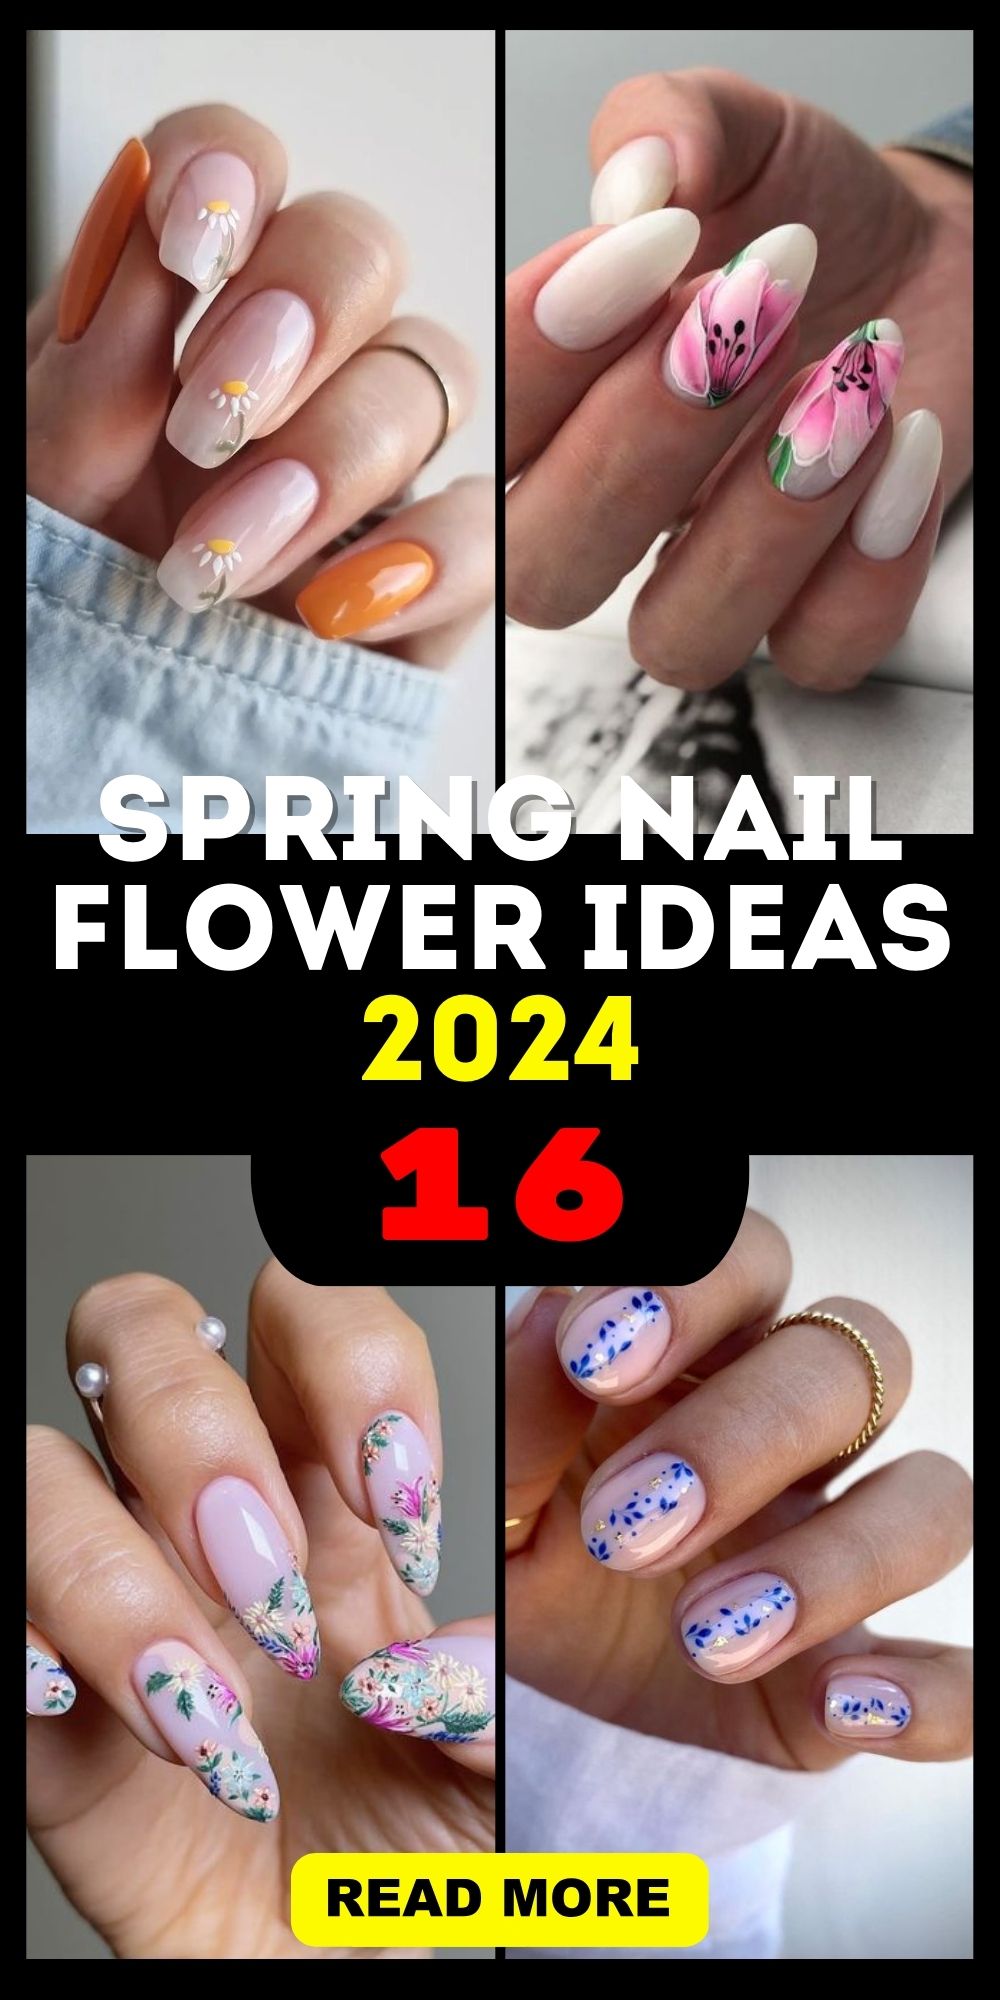 Blossom This Season: Trendy Spring Nail Flowers & Designs for 2024